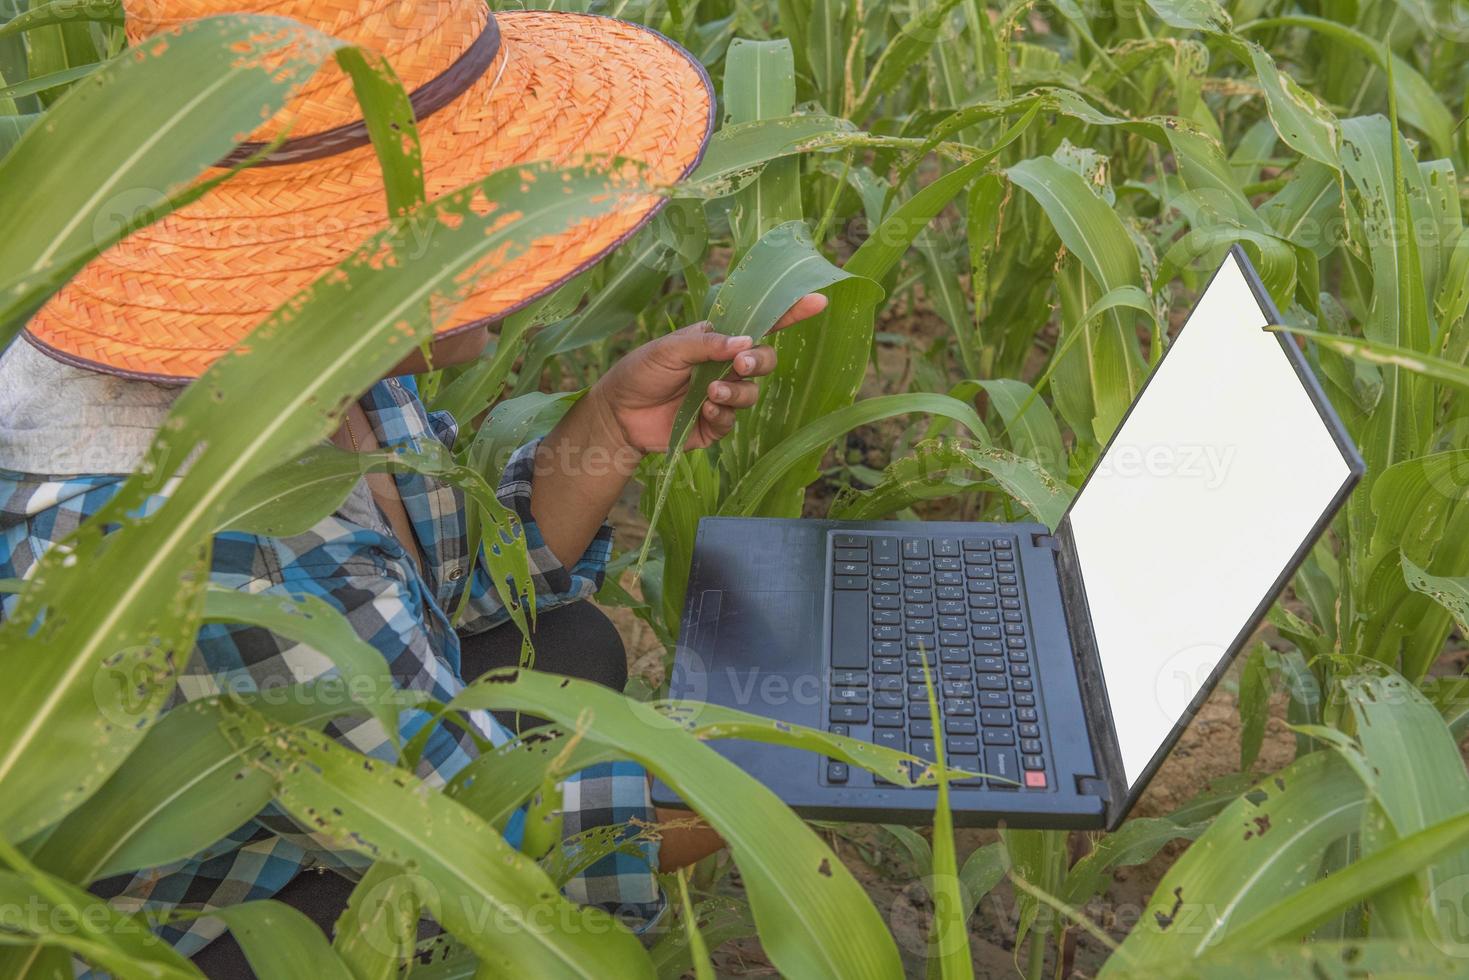 Women farmers in Asia use laptops  gather information to study information about agricultural. photo